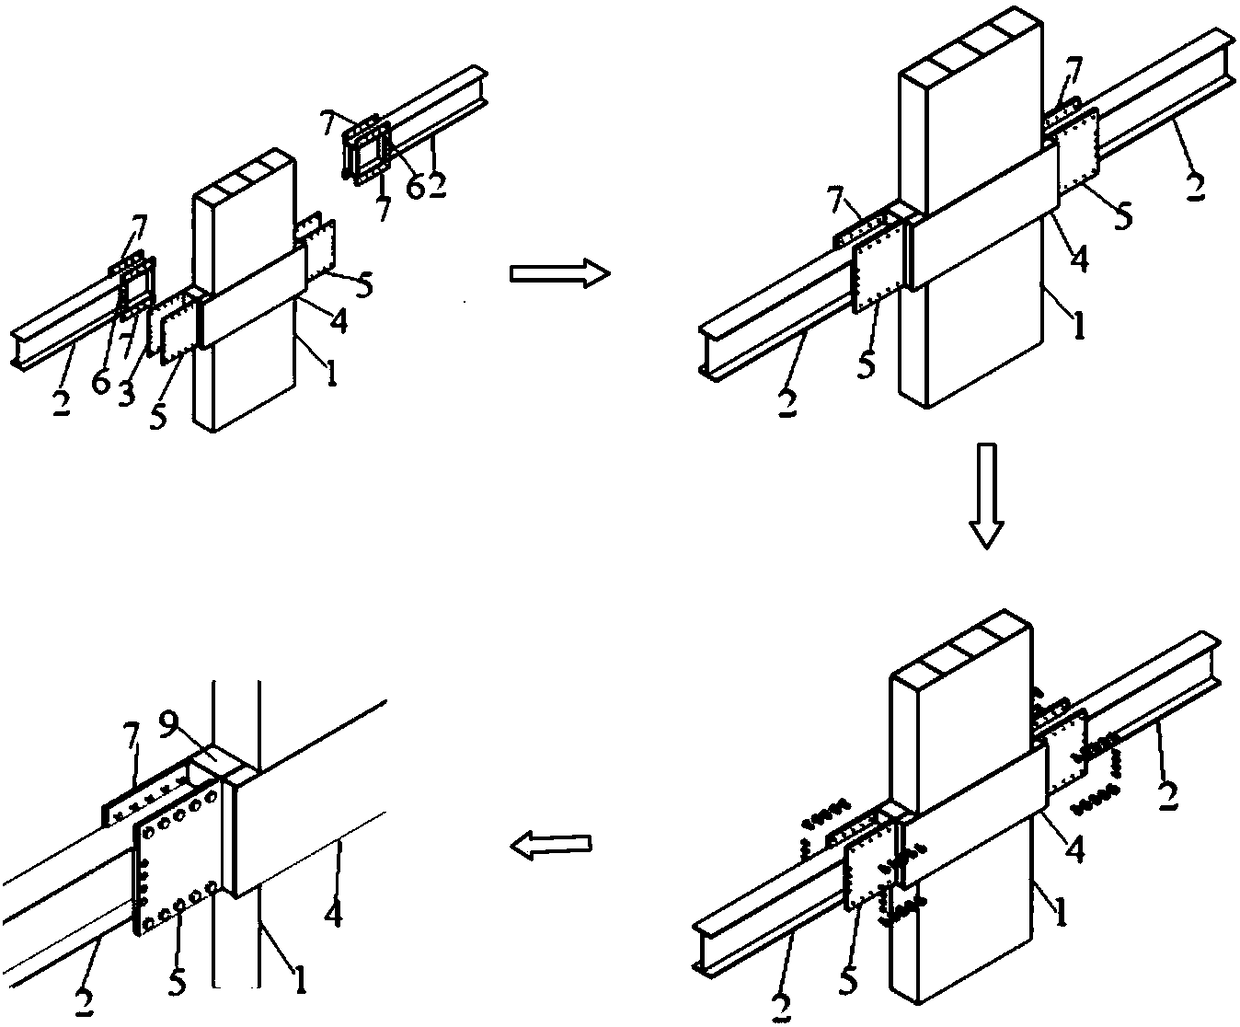 A three-side plate joint for eccentric beam-column connection and assembly method